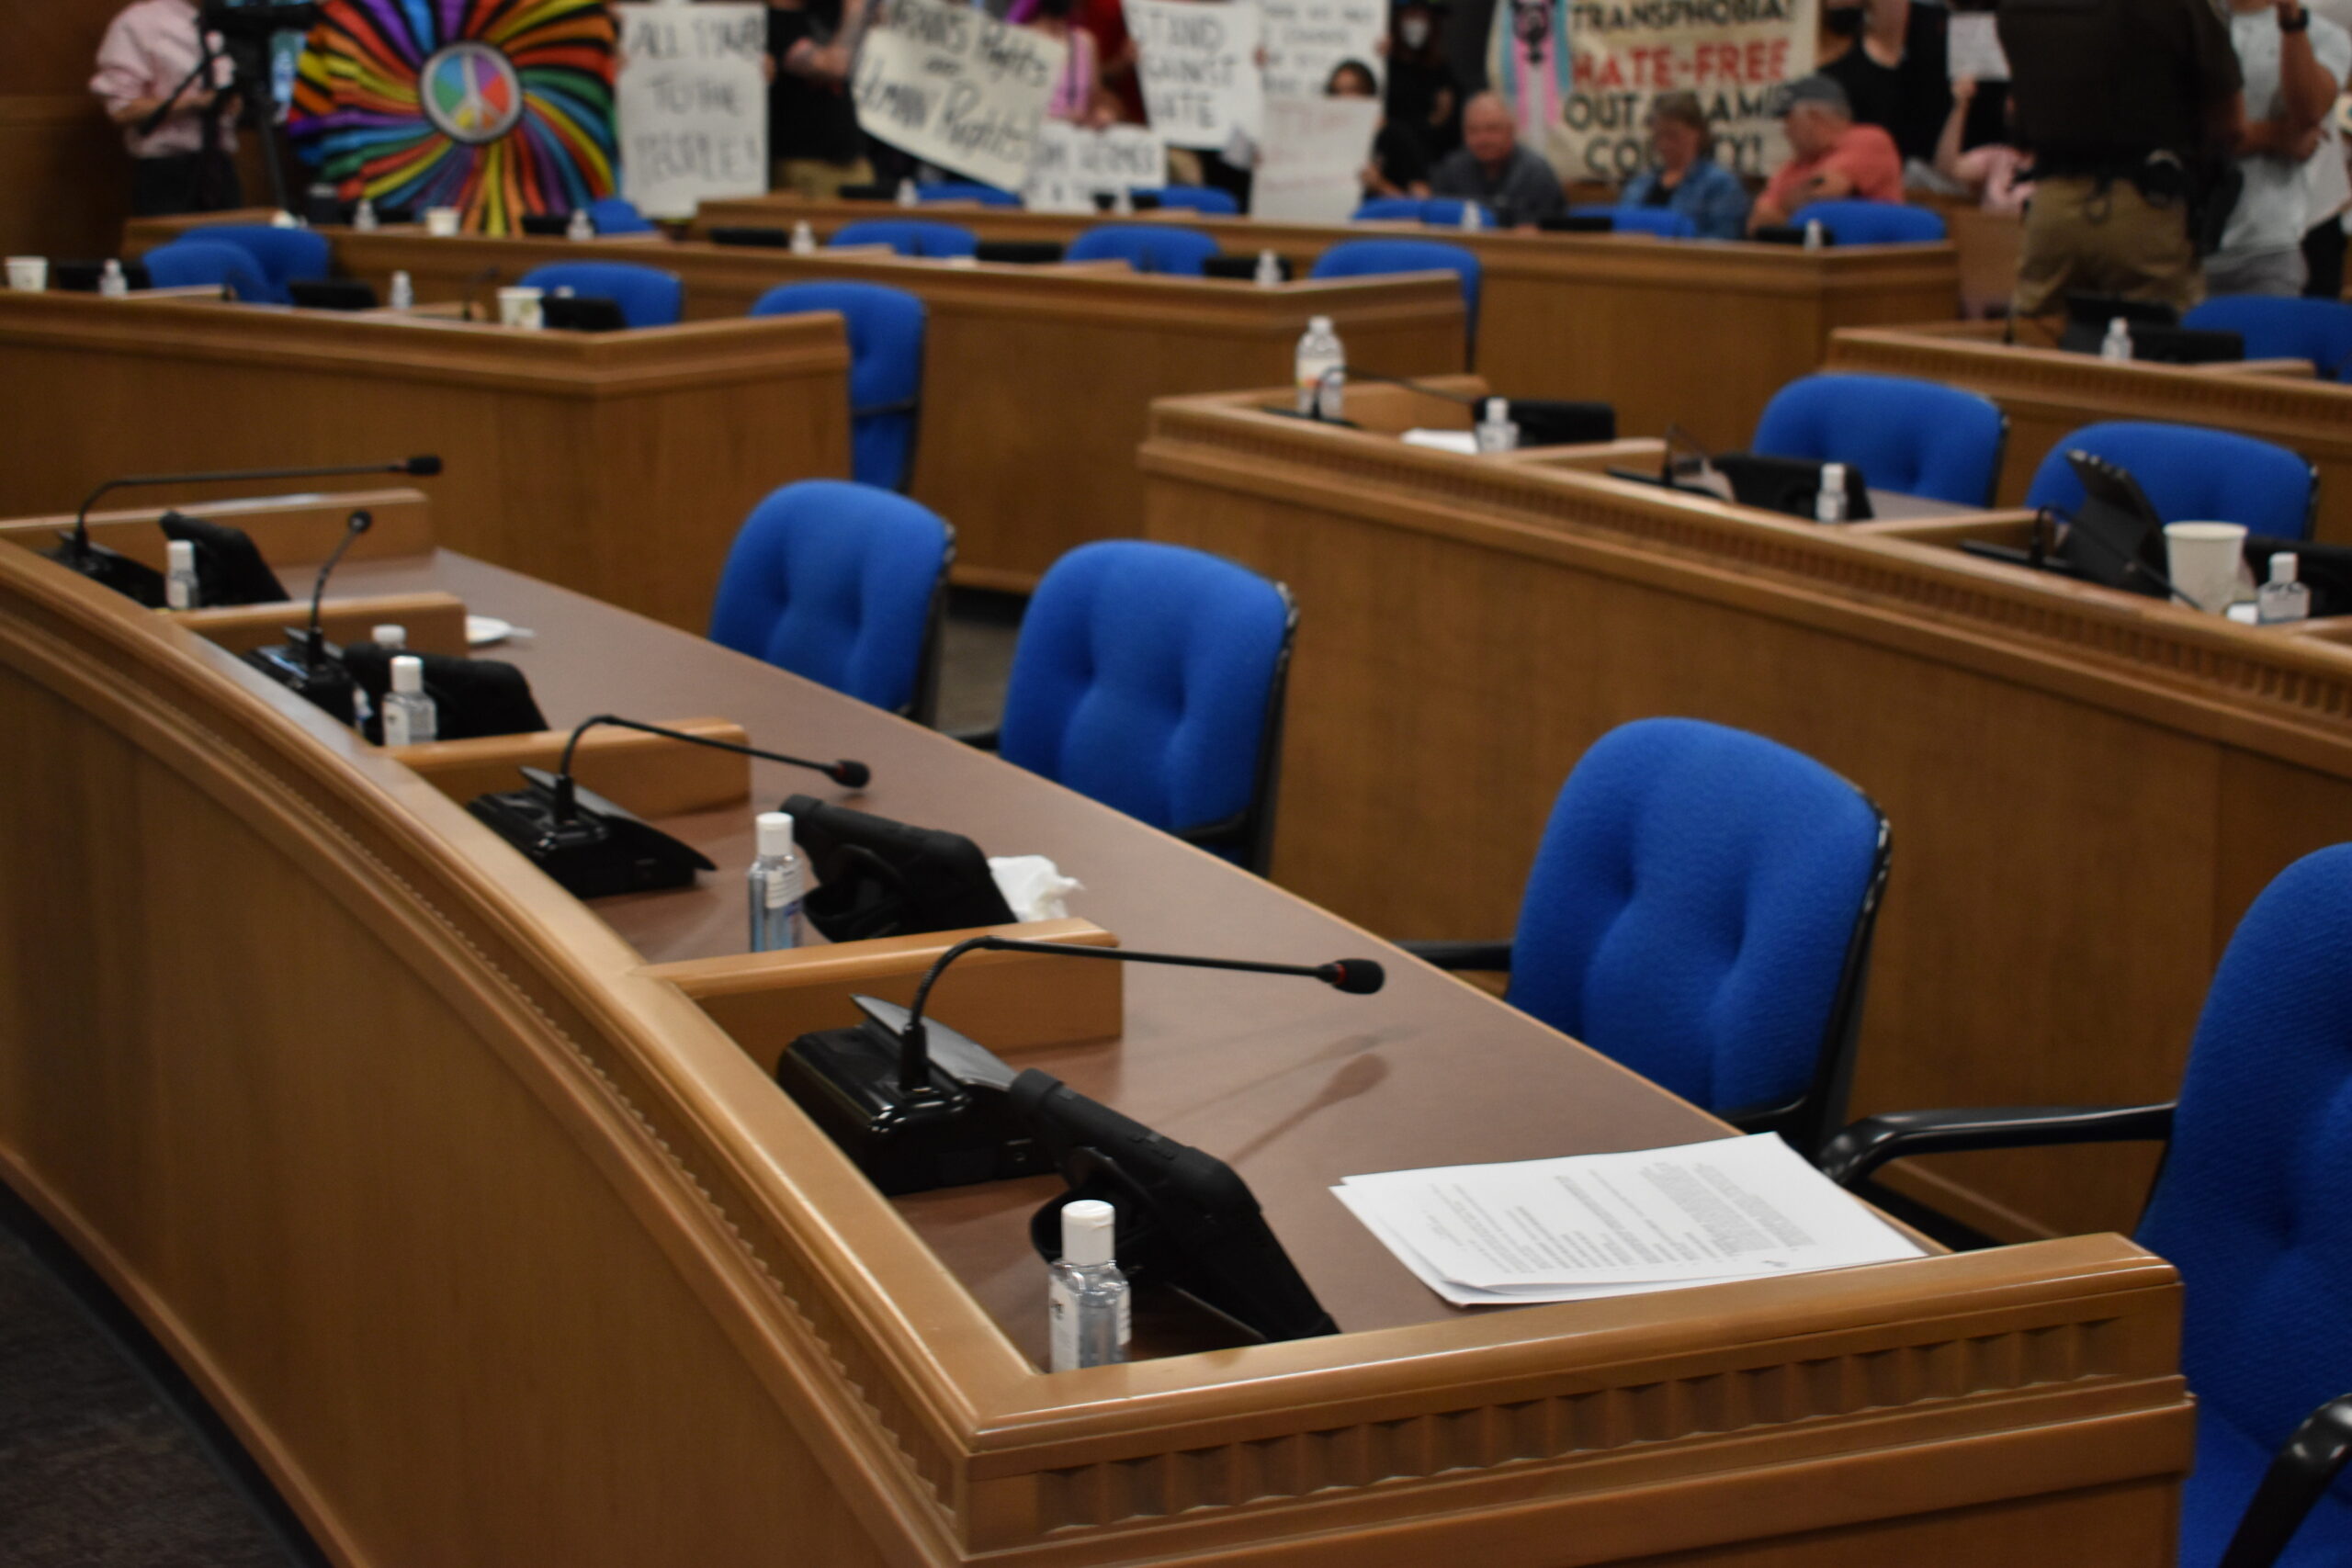 Outagamie County Board seats are empty during a disruption to Tuesday's meeting.